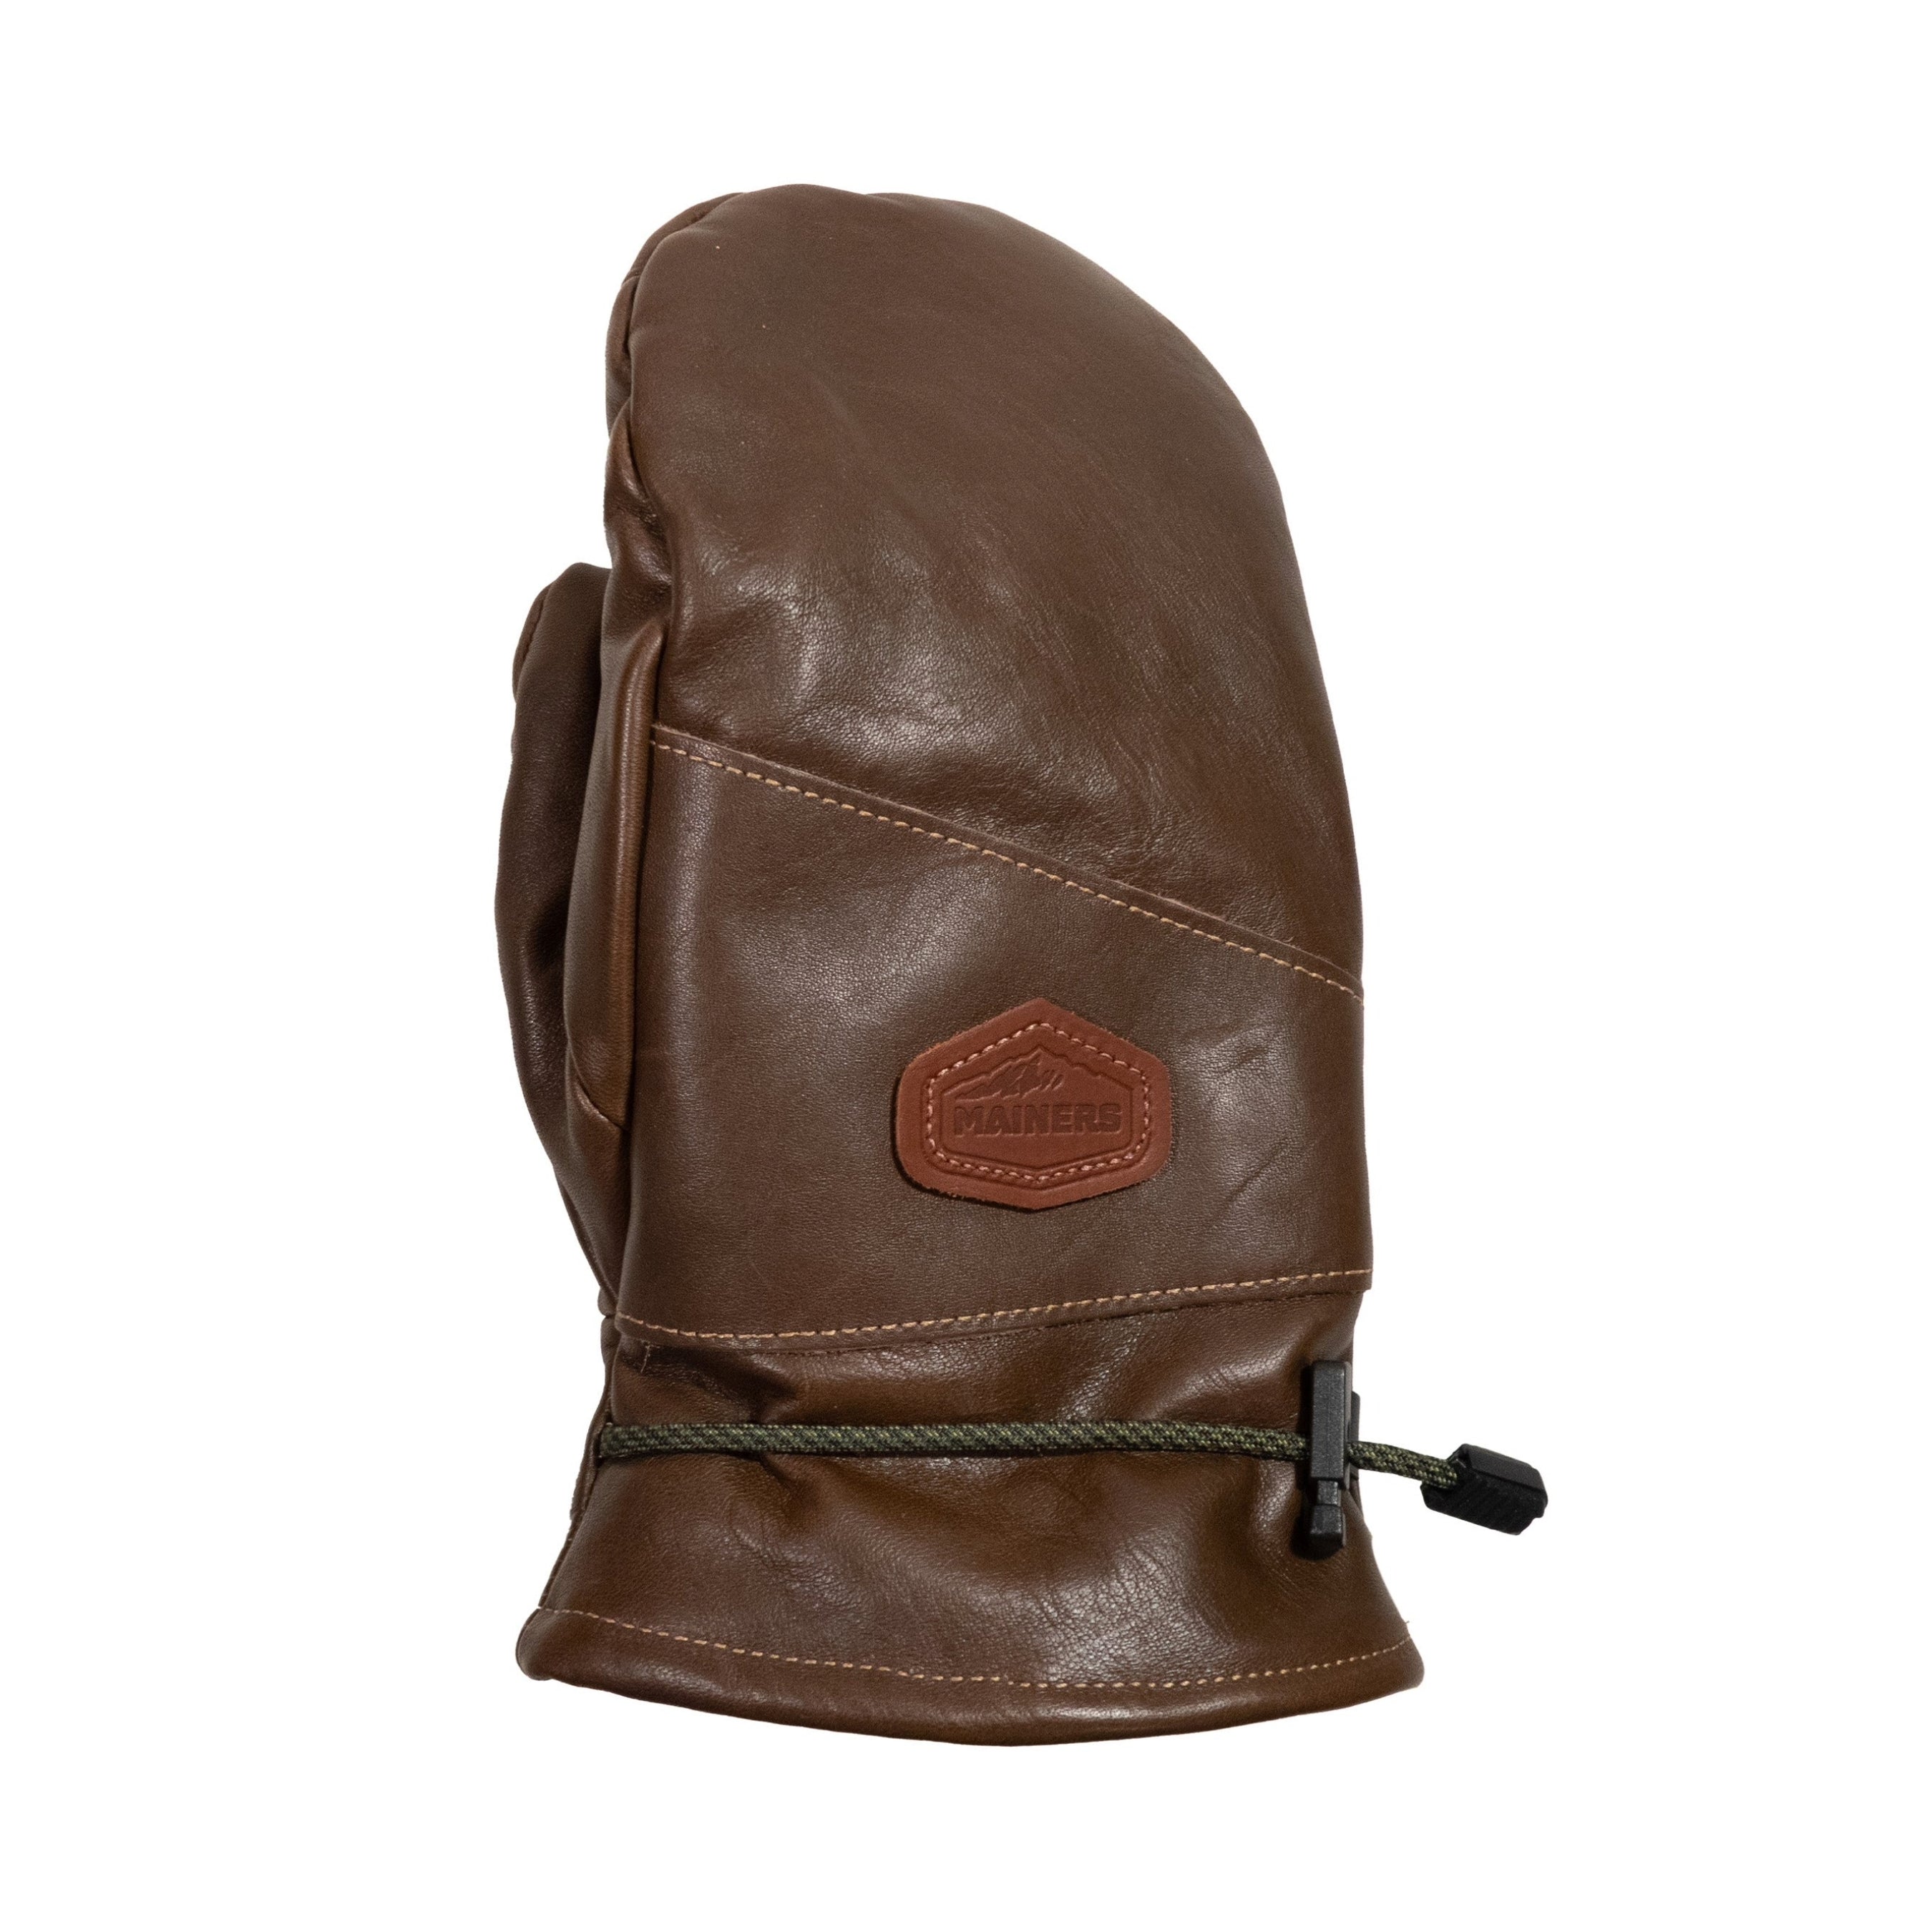 A brown leather mitten with a logo on it.